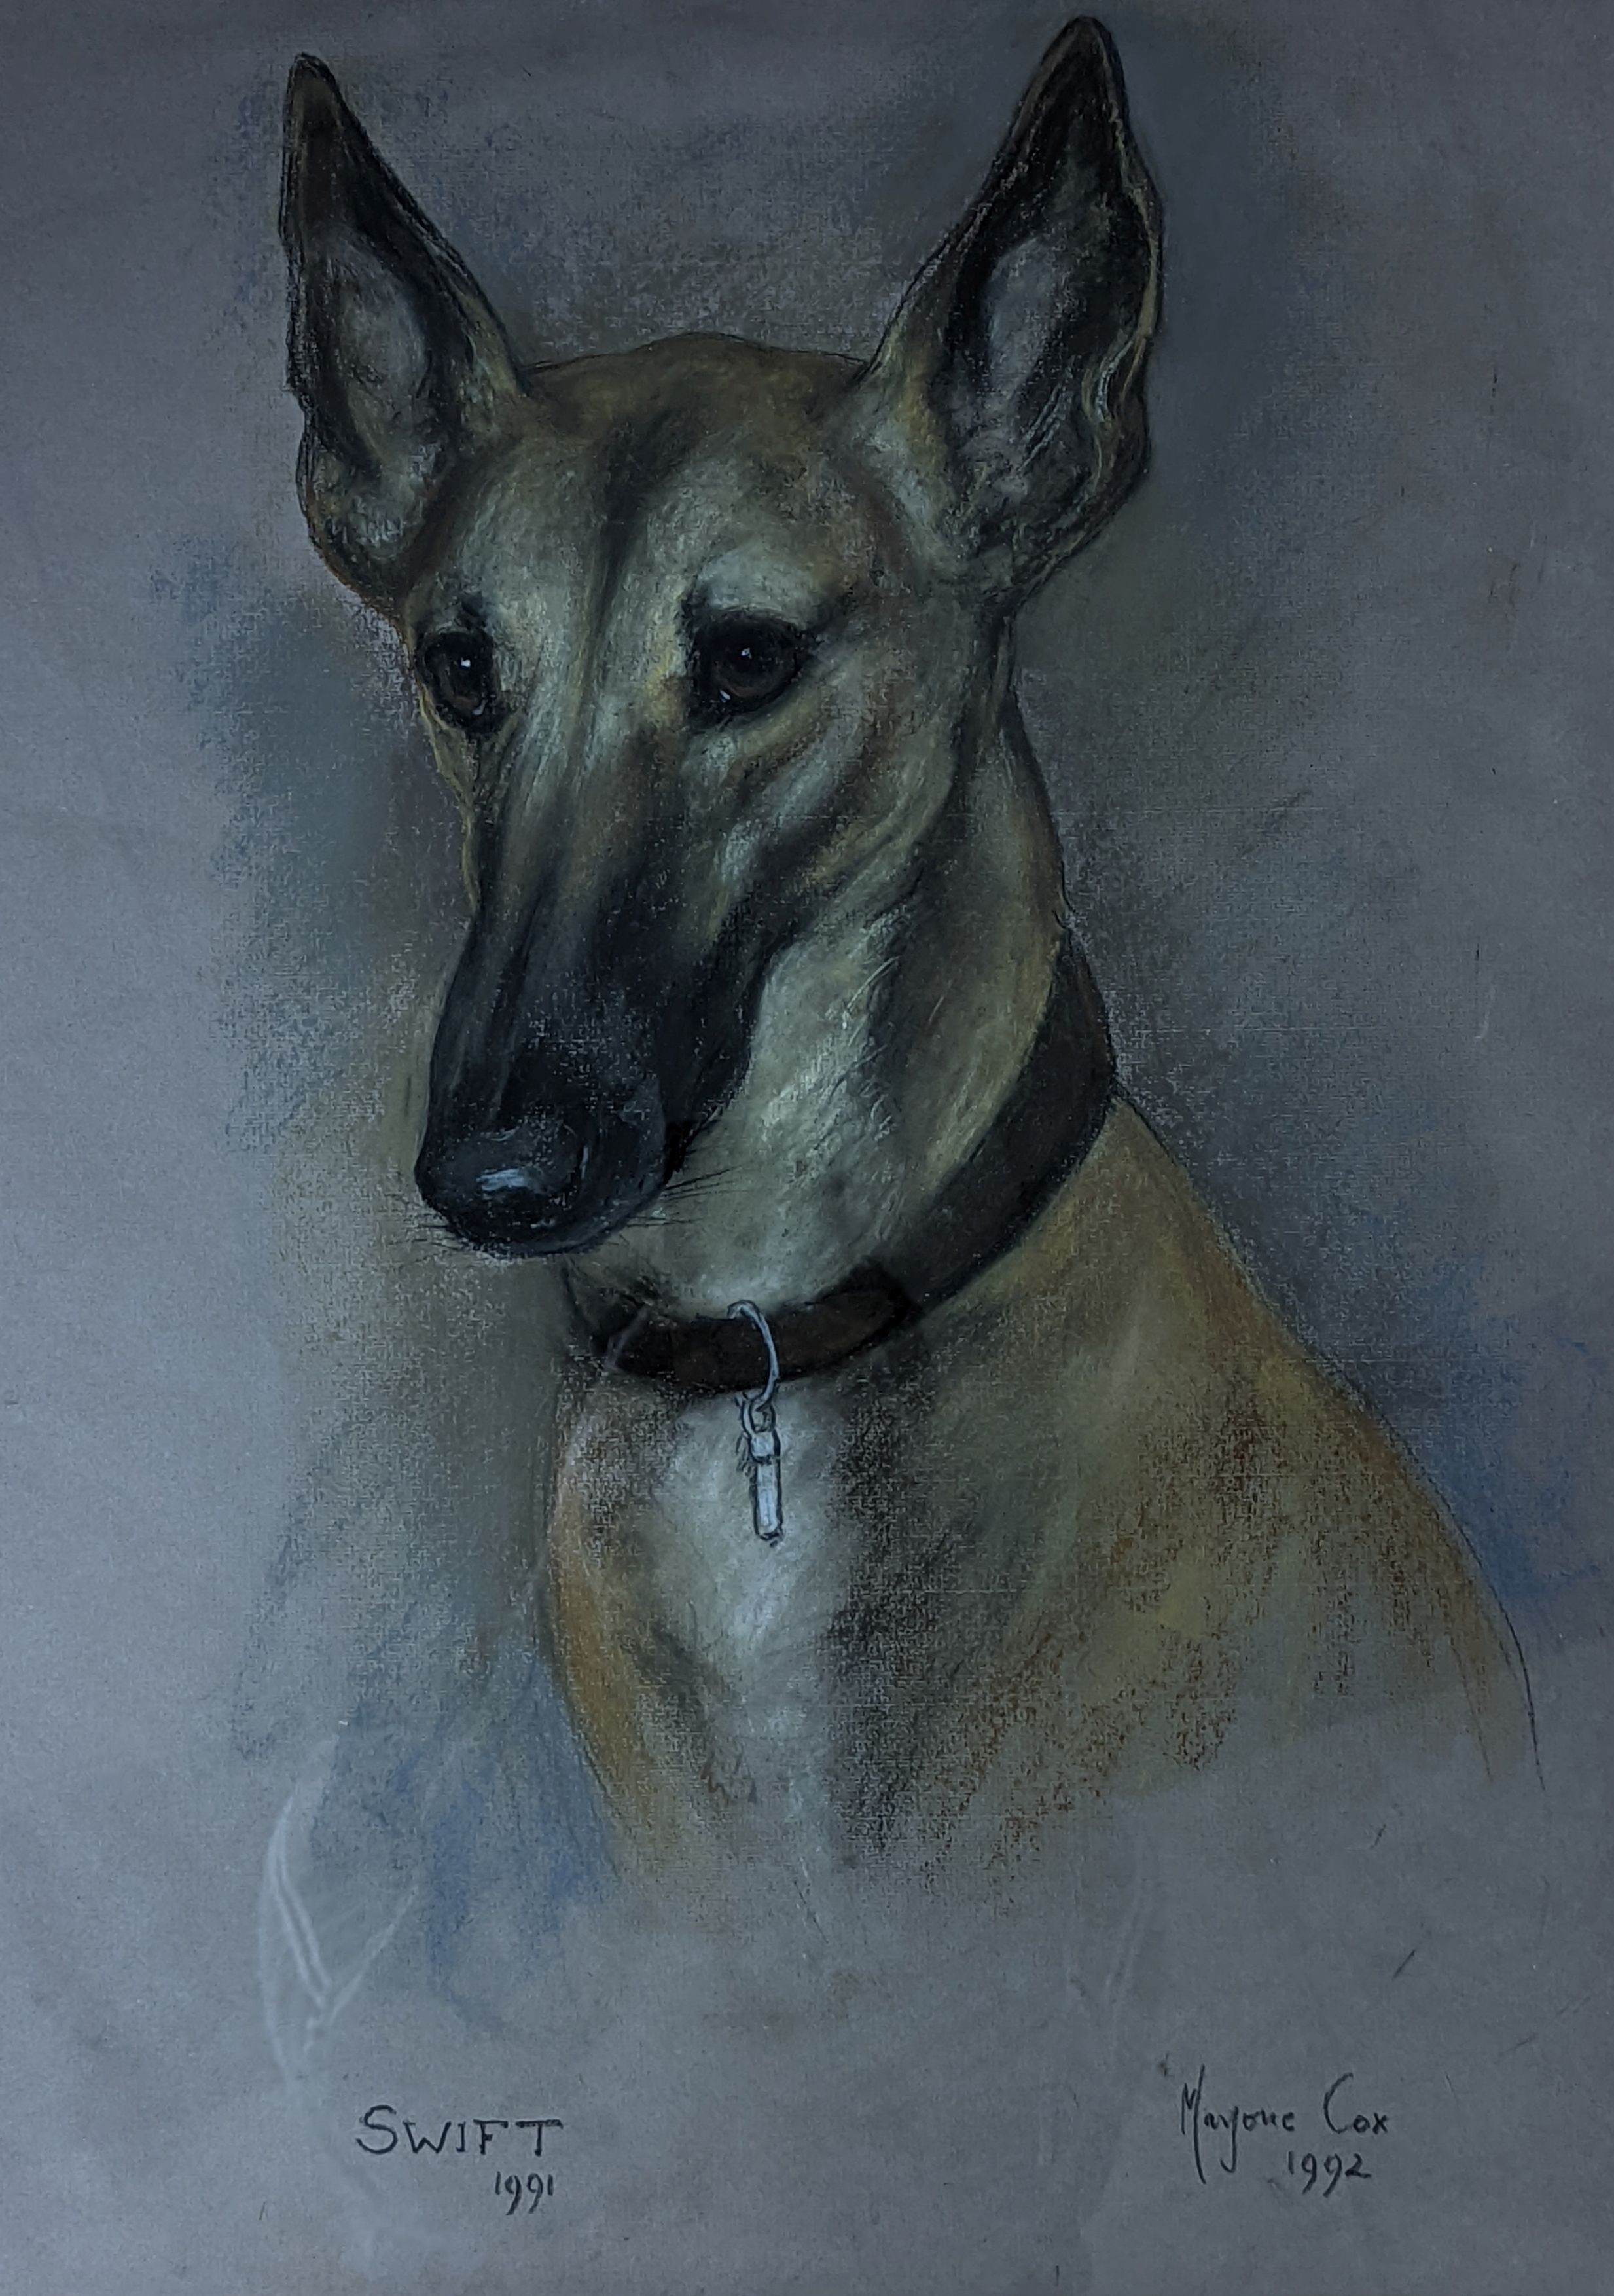 Marjorie Cox (1915-2003), pastel, Portrait of a dog, signed and dated 1992, 49 x 36cm